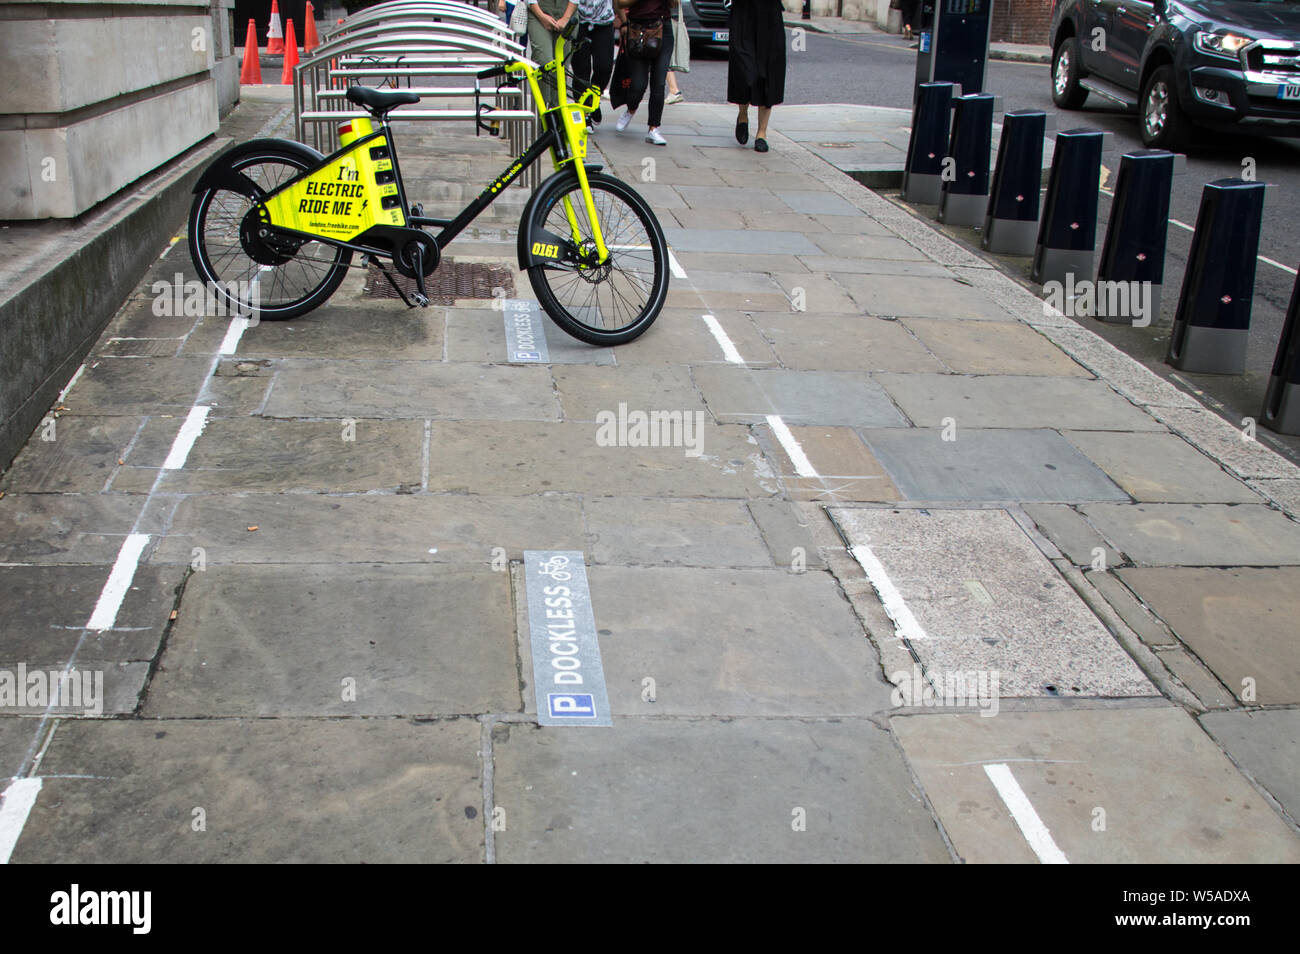 e bike / electric bike in London parked in the docking area Stock Photo